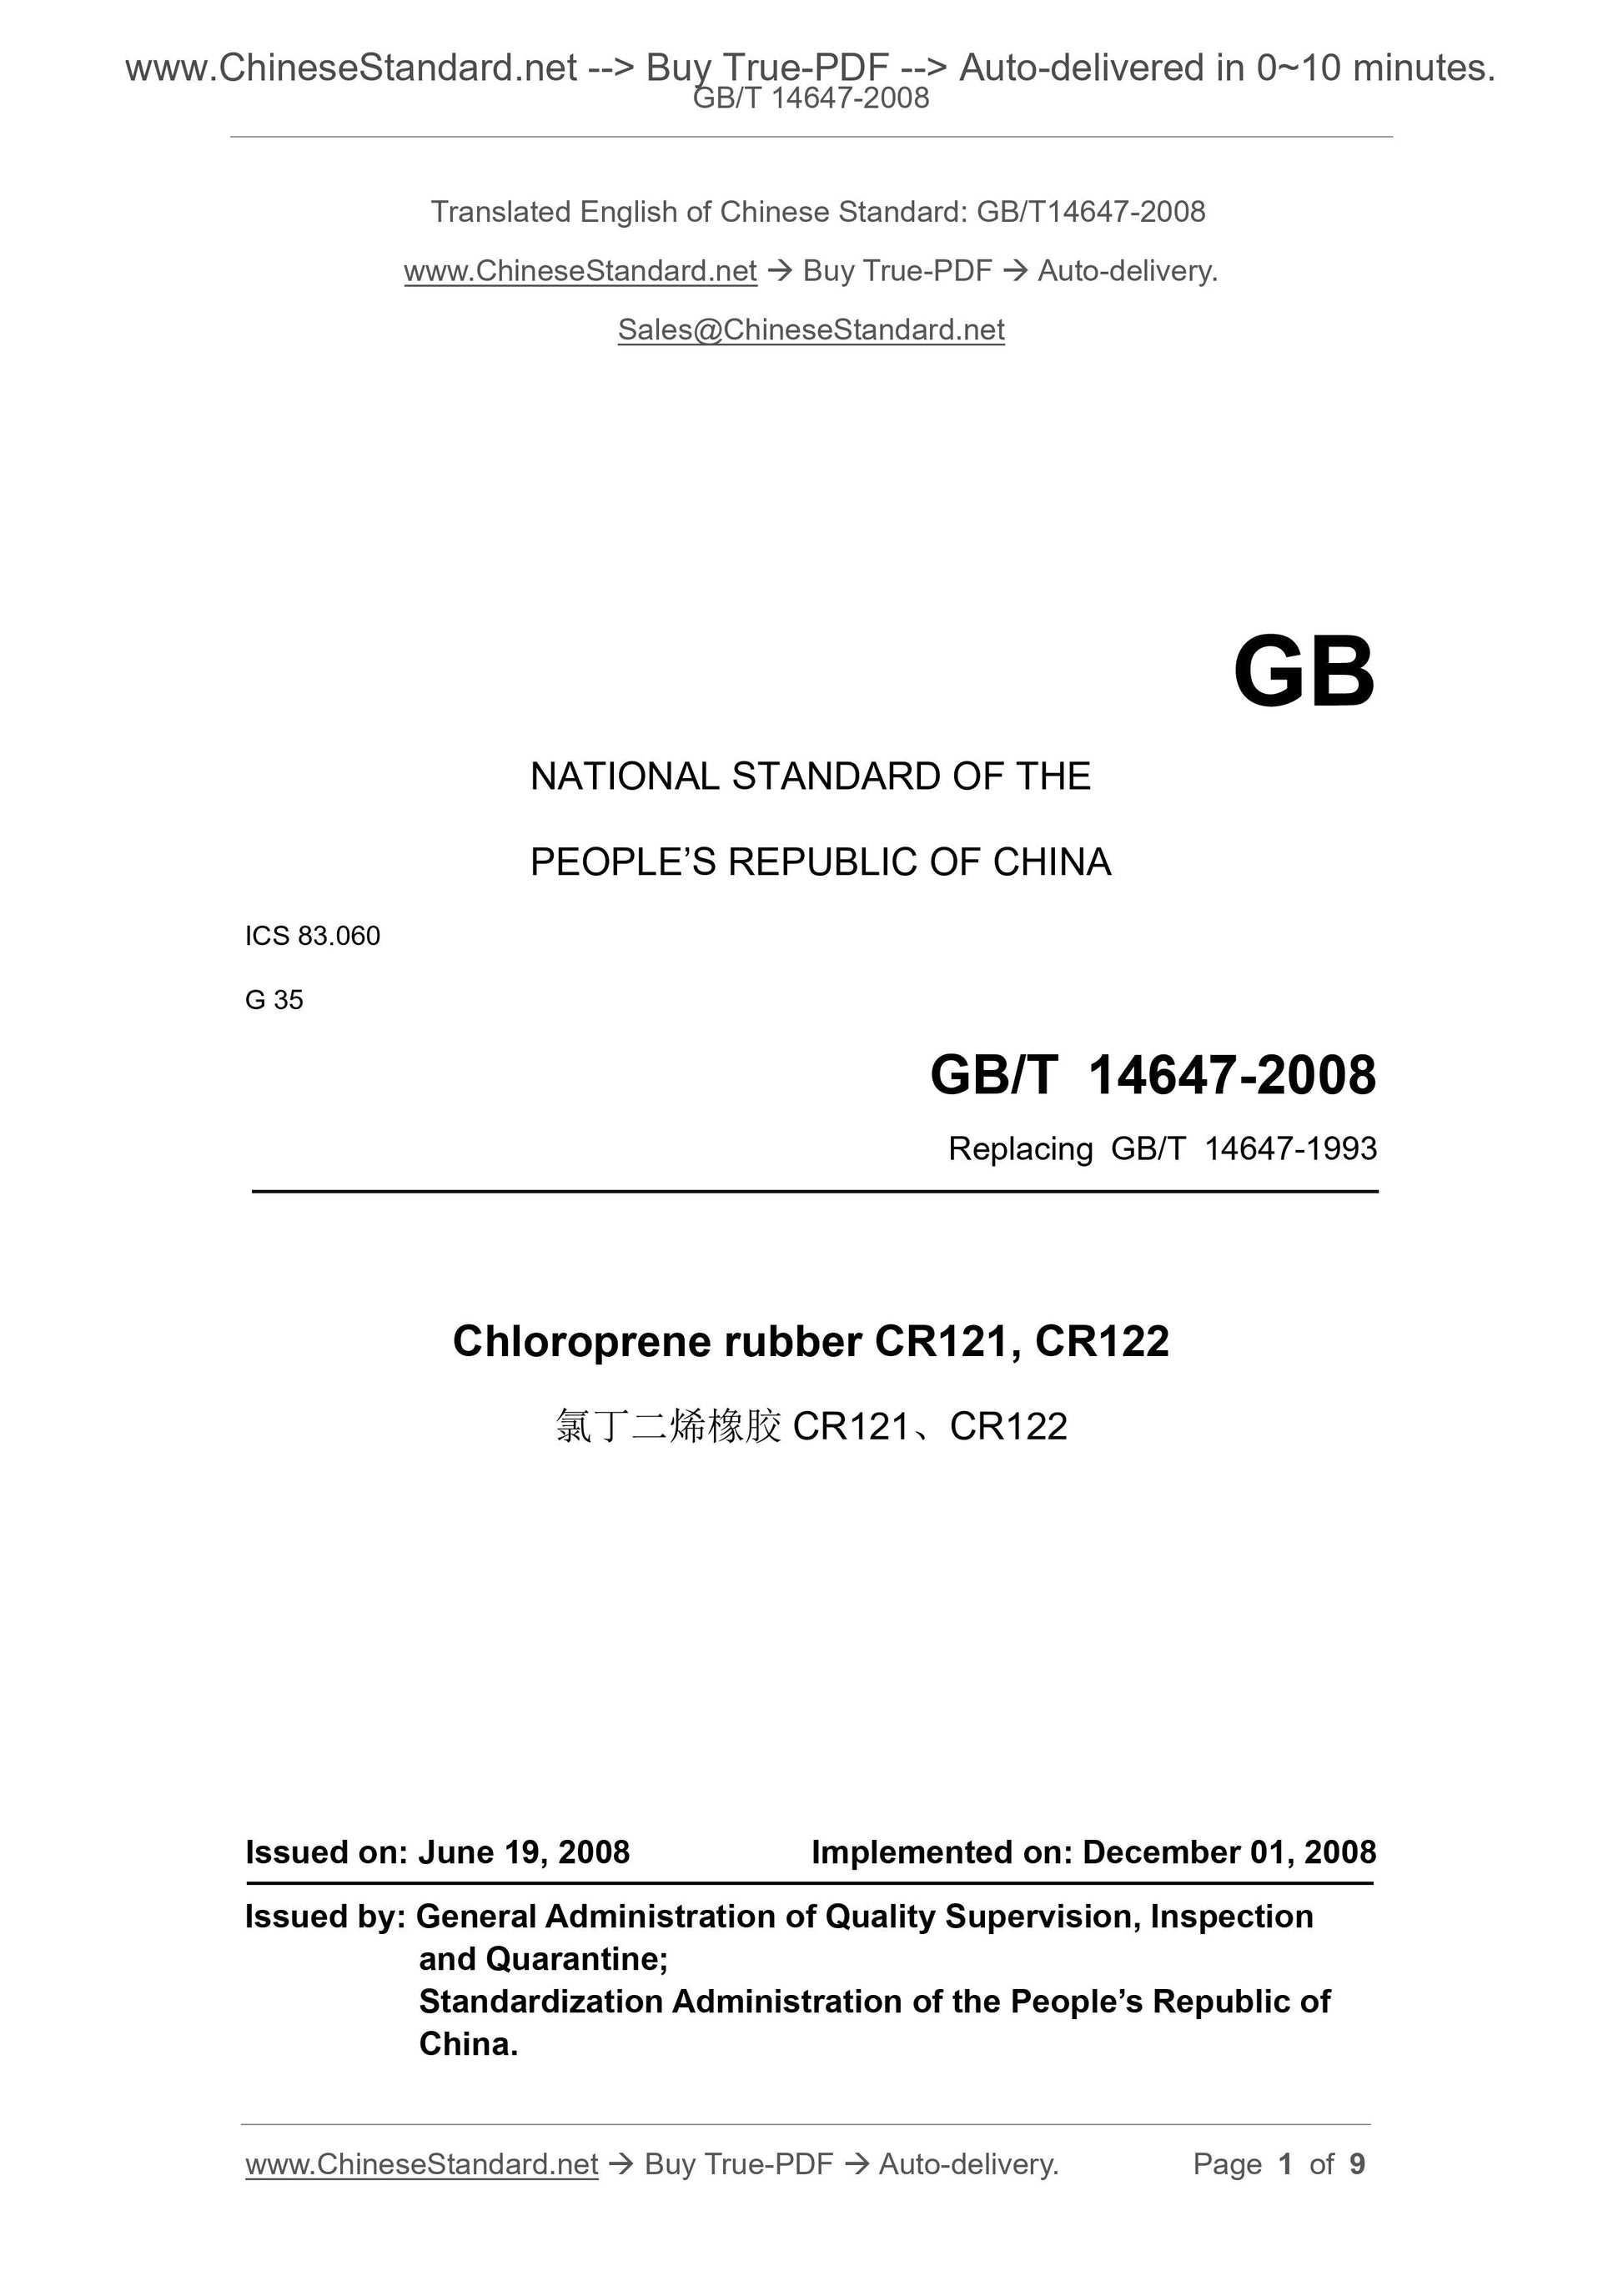 GB/T 14647-2008 Page 1